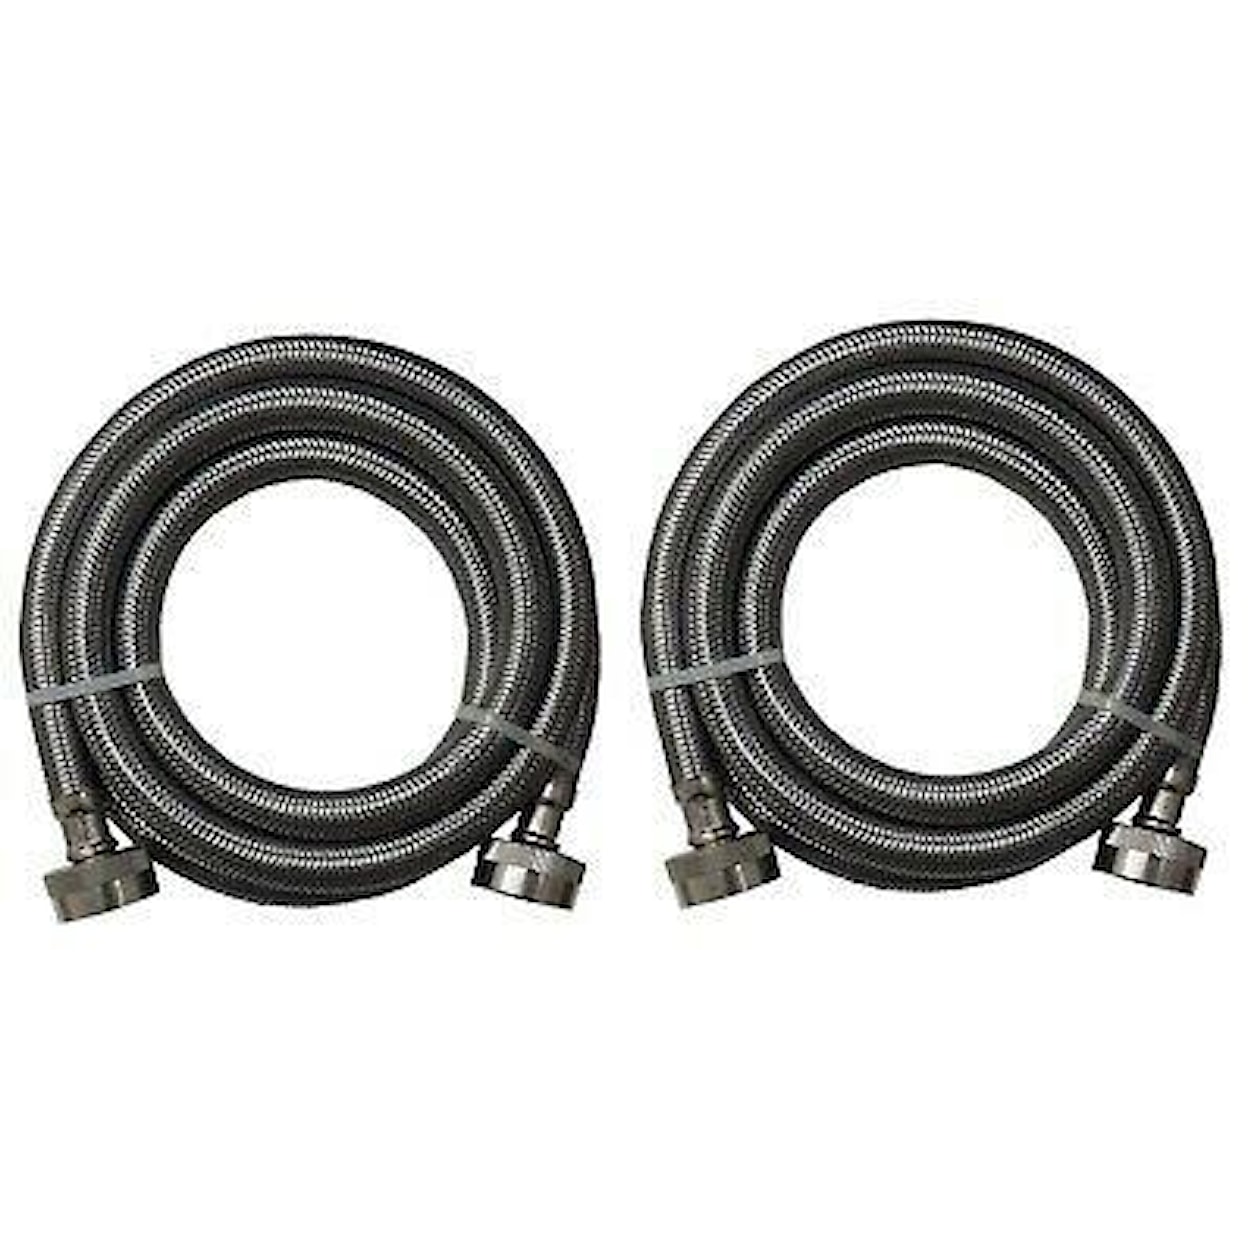 Dealer Brand Accessories Washer Stainless Steel Fill Hoses